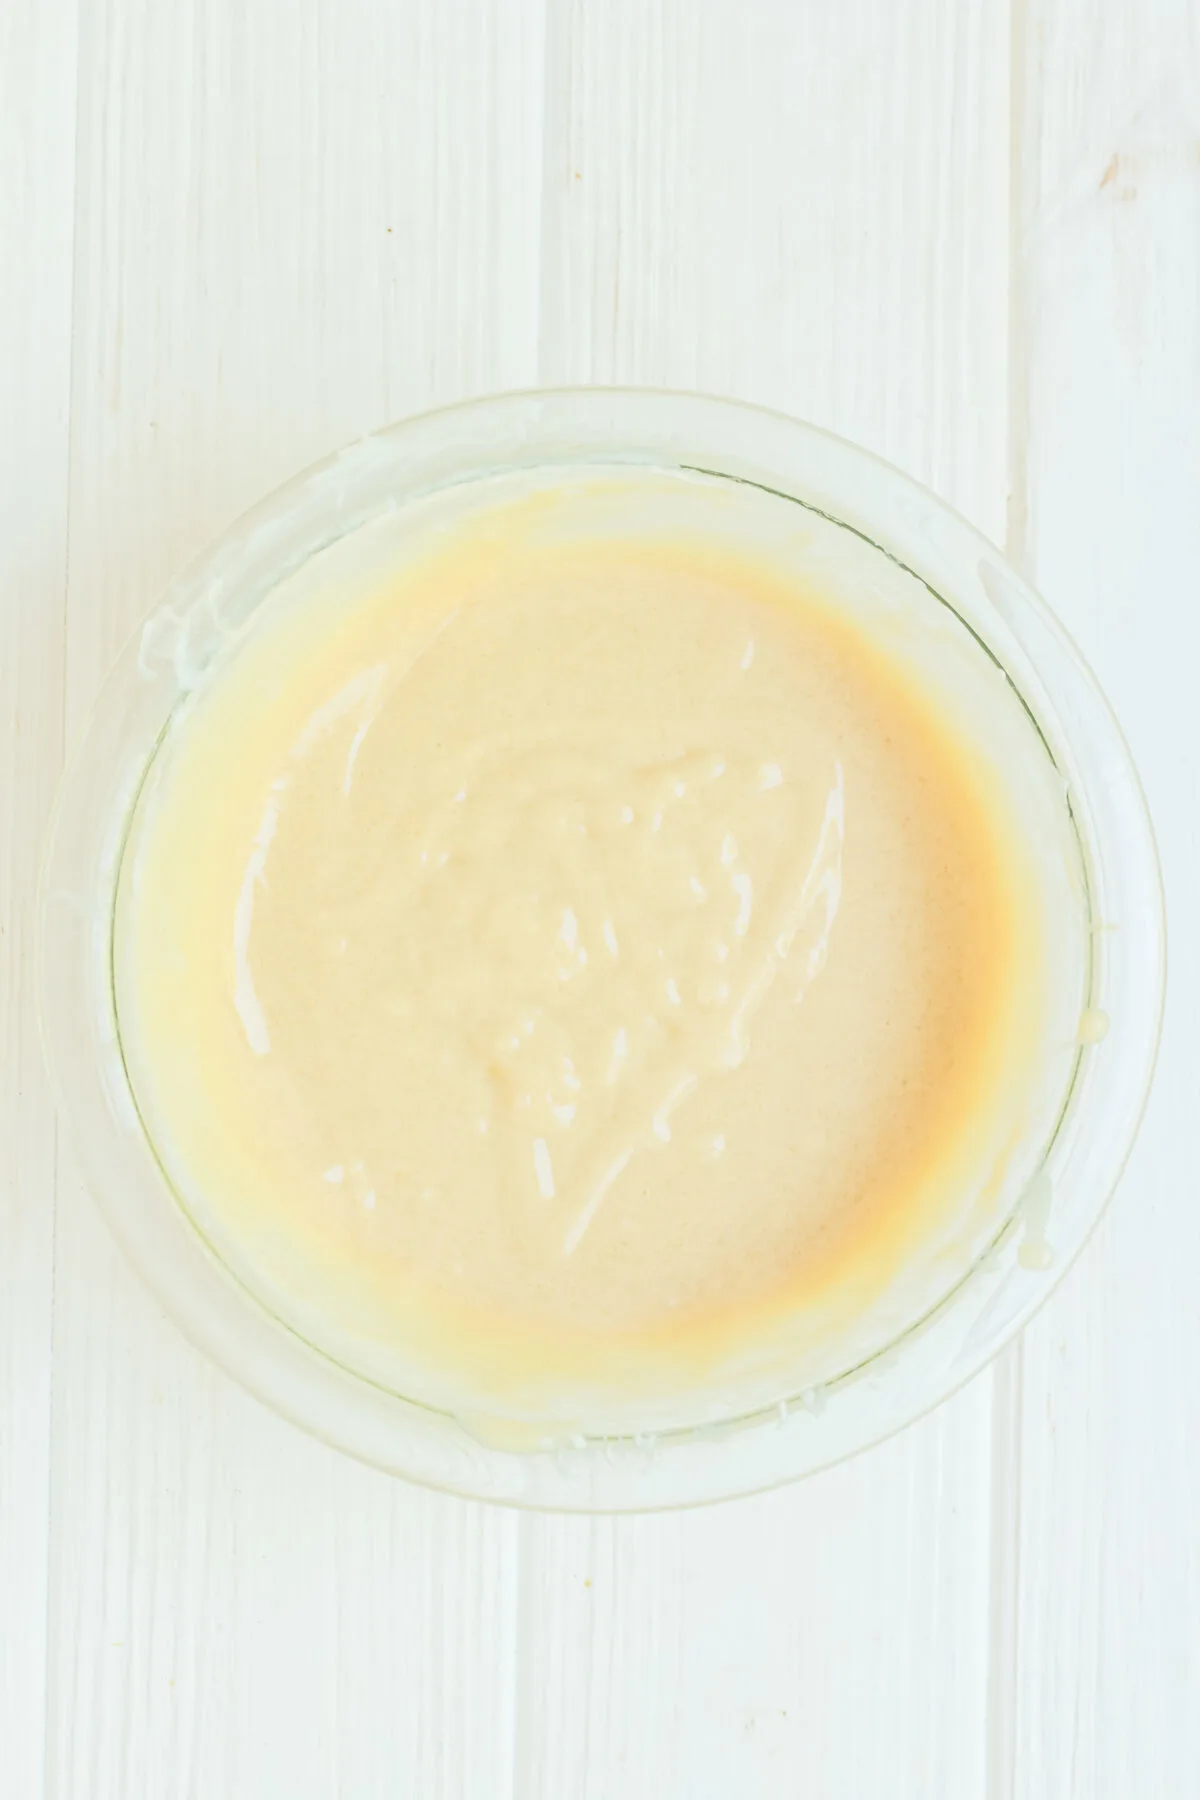 Cream cheese mixture combined in a glass bowl.